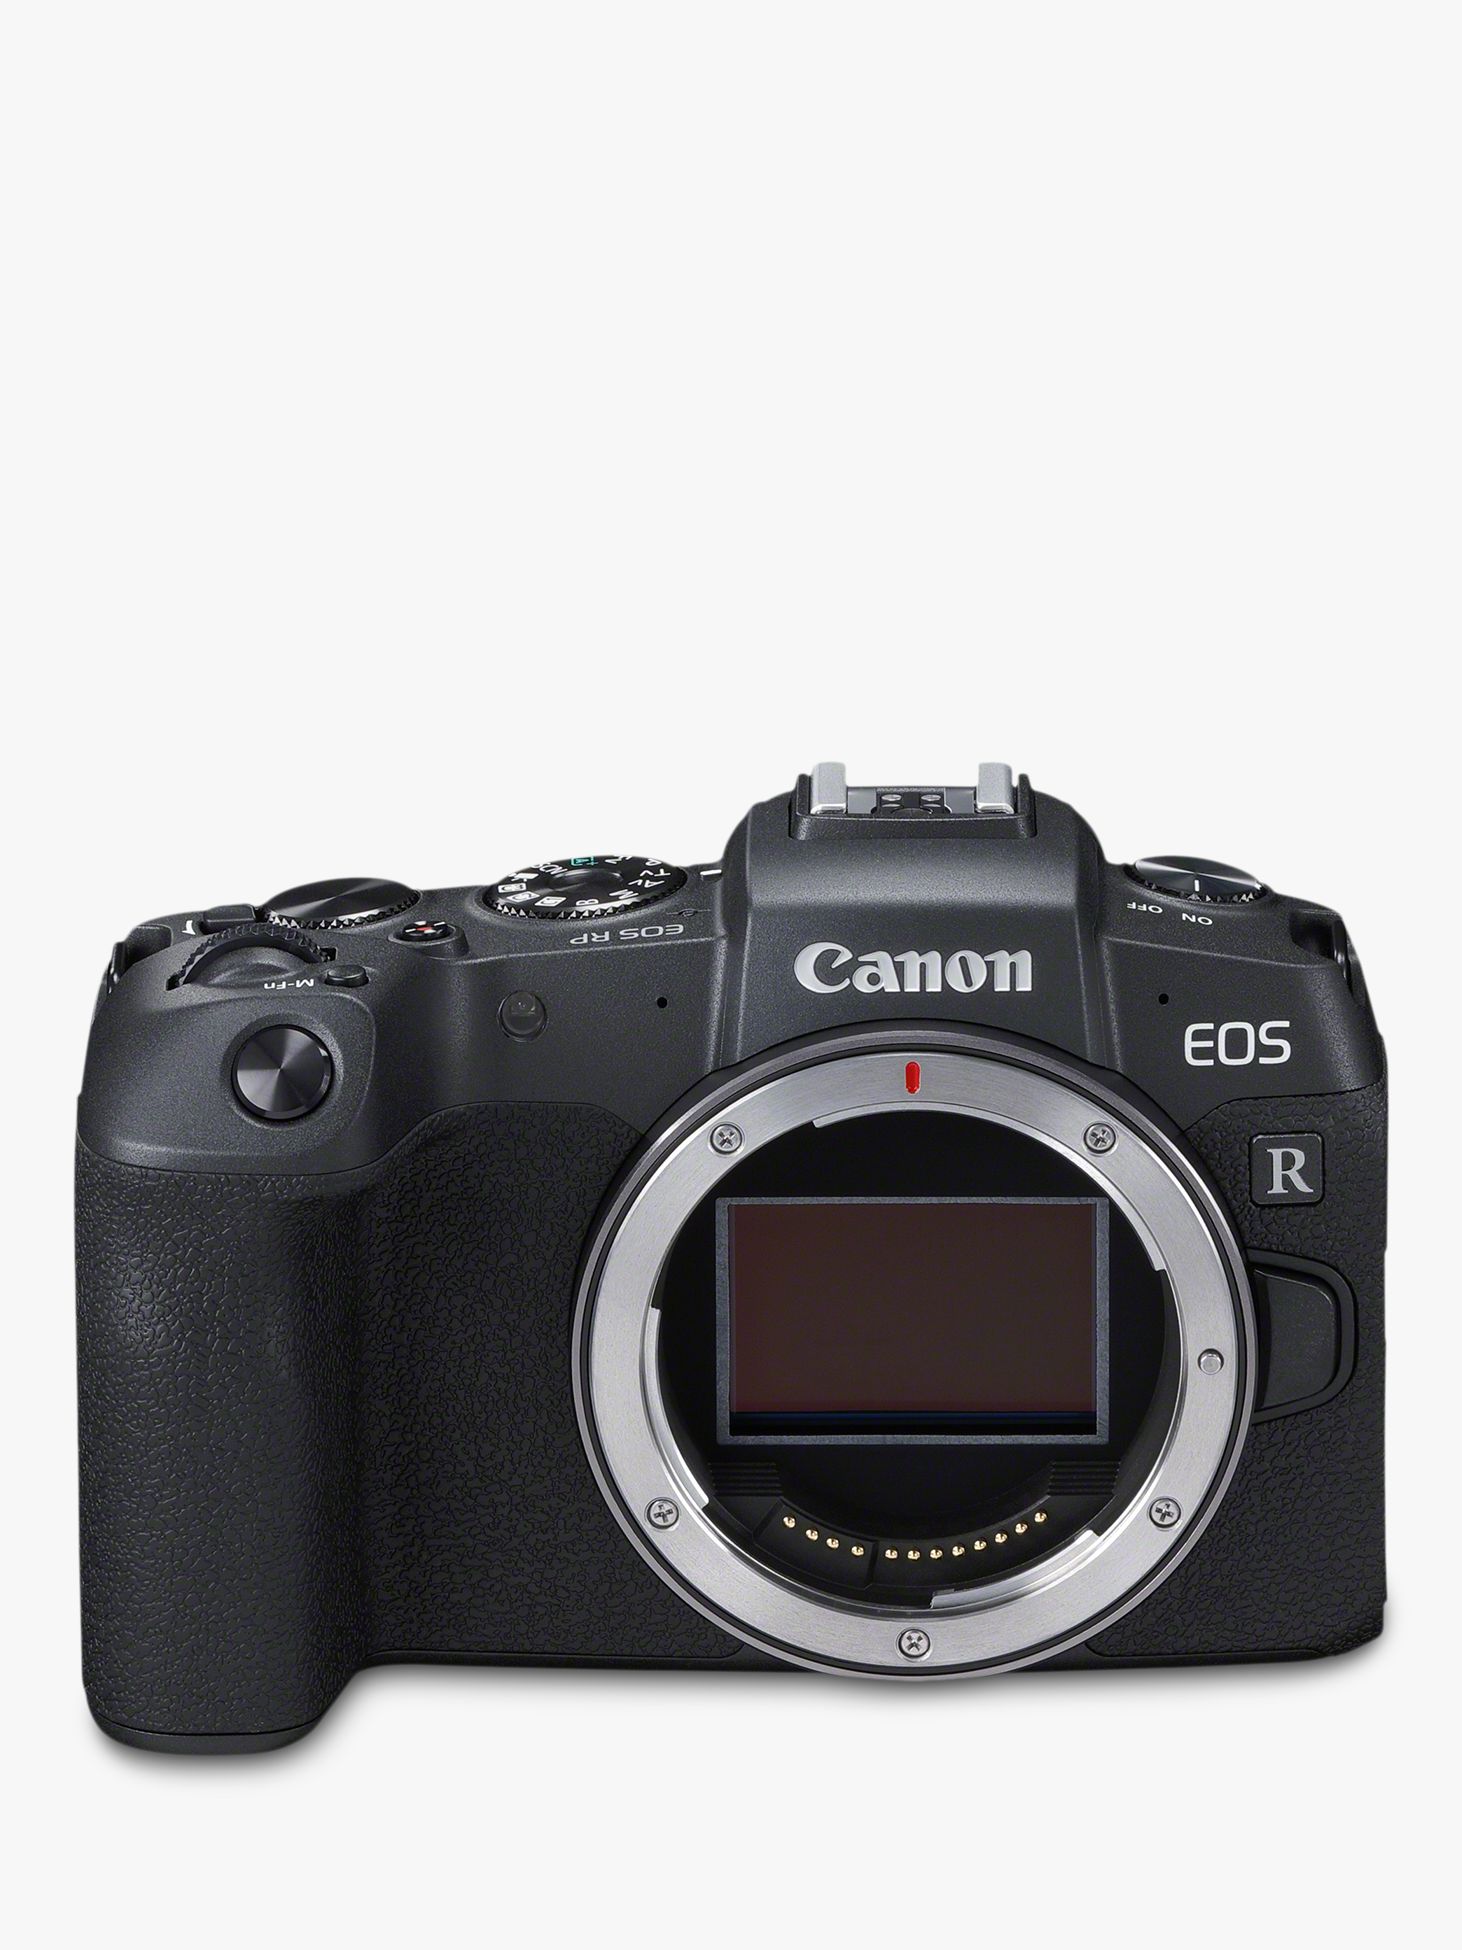 Image of Canon EOS RP Compact System Camera 4K Ultra HD 262MP WiFi Bluetooth OLED EVF 3 VariAngle Touch Screen with EF Mount Adapter Body Only